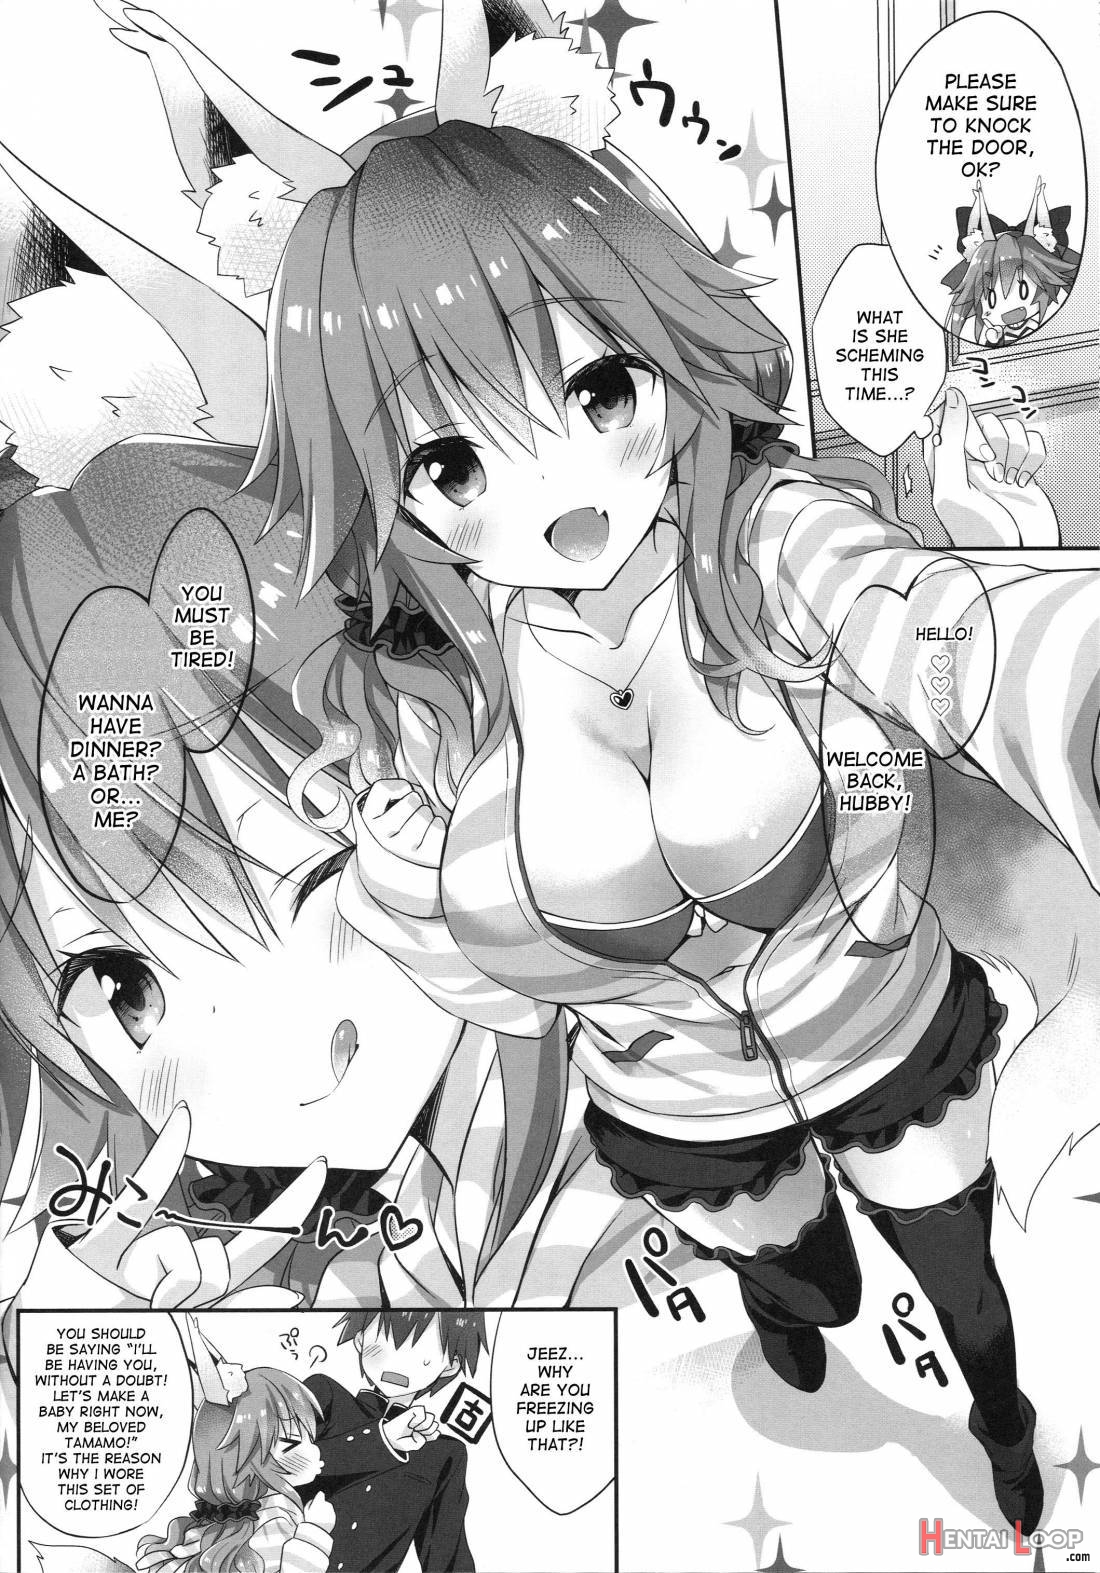 Ore To Tamamo To My Room 2 page 3